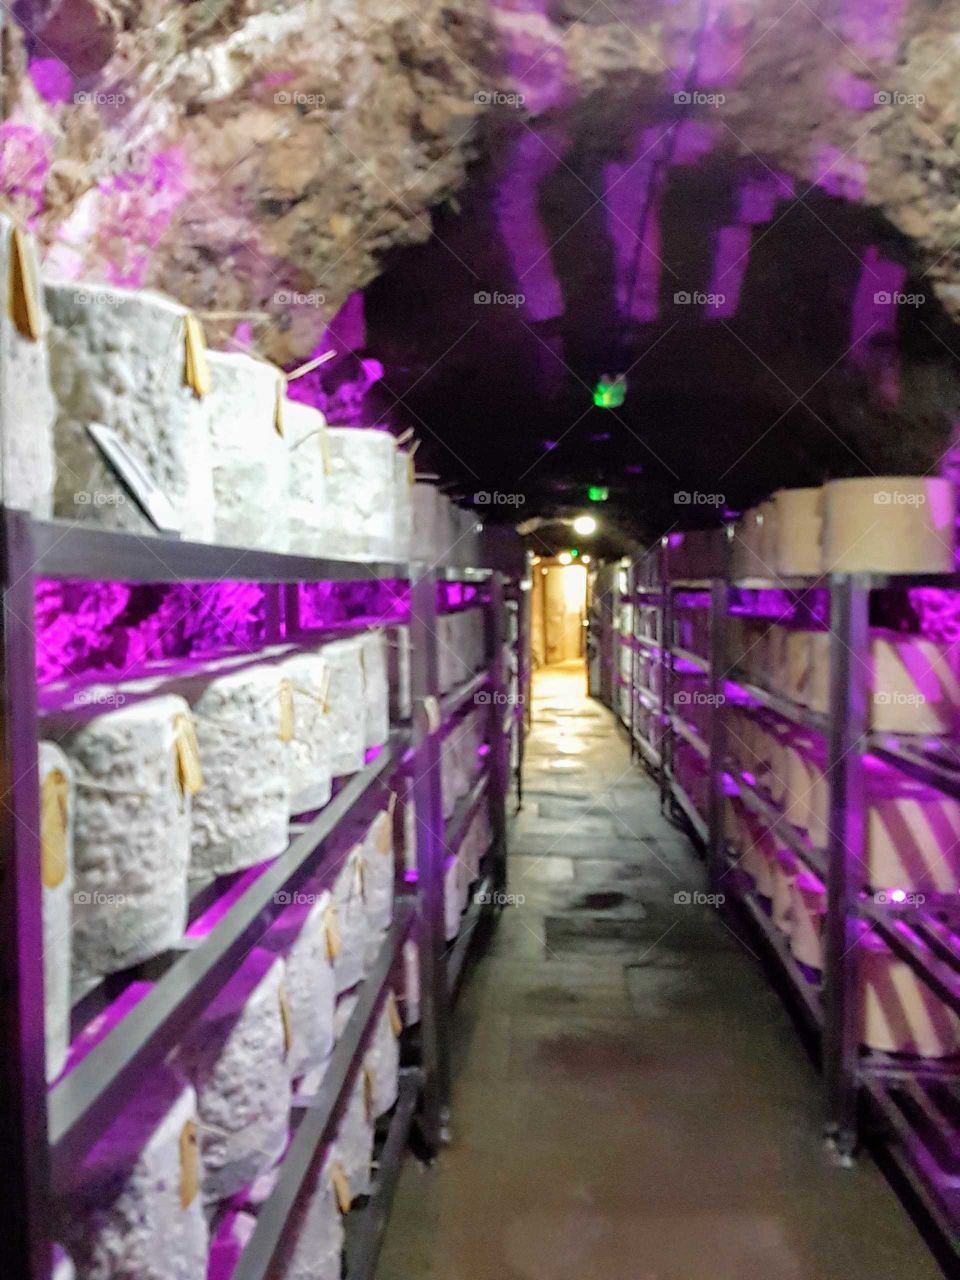 cheese matured in caves